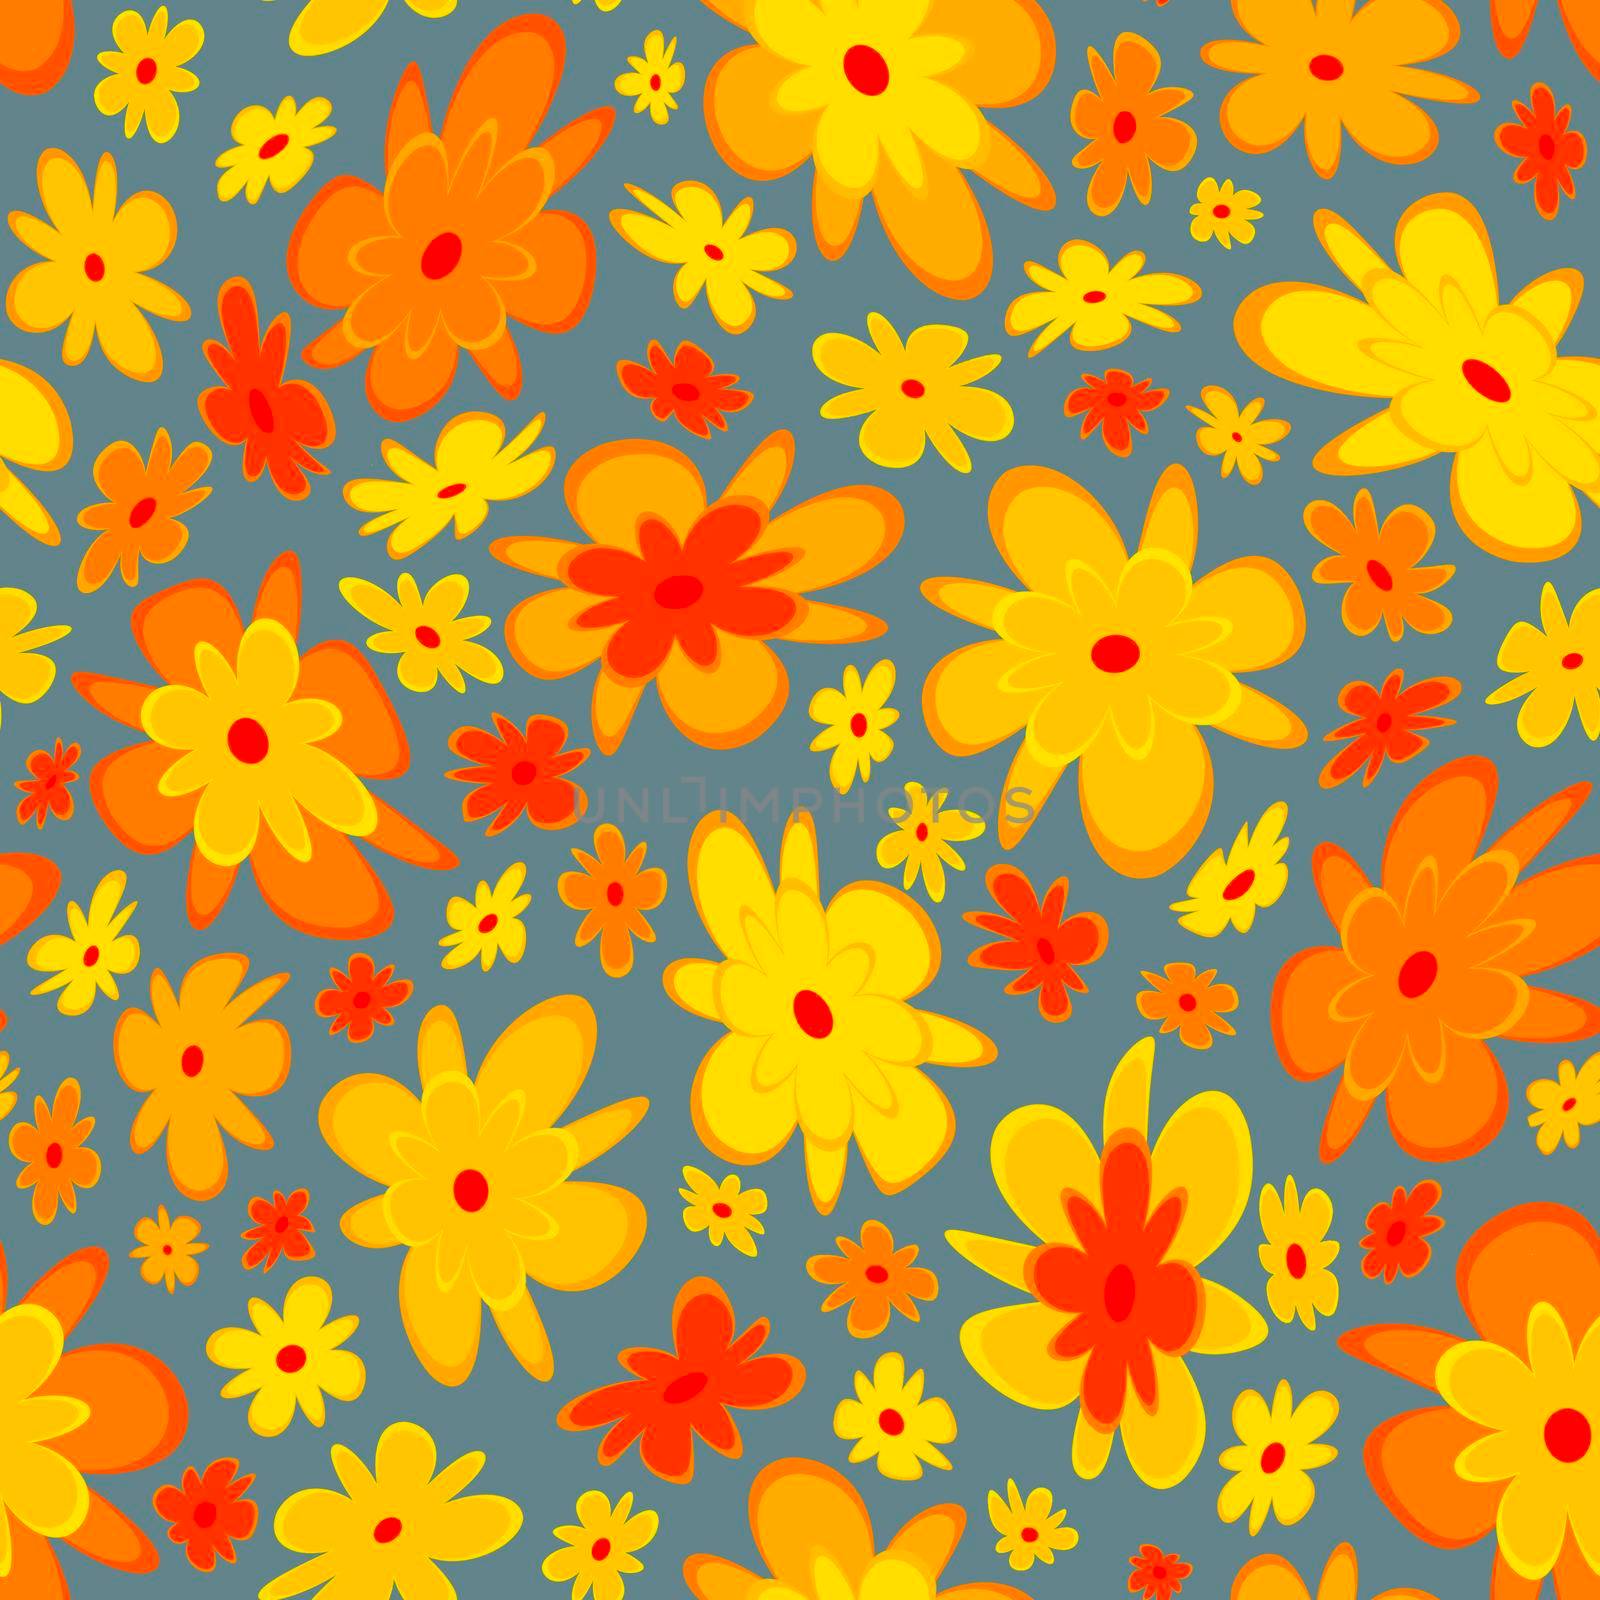 Trendy fabric pattern with miniature flowers.Summer print.Fashion design.Motifs scattered random.Elegant template for fashion prints.Good for fashion,textile,fabric,gift wrapping paper.Yellow on gray.